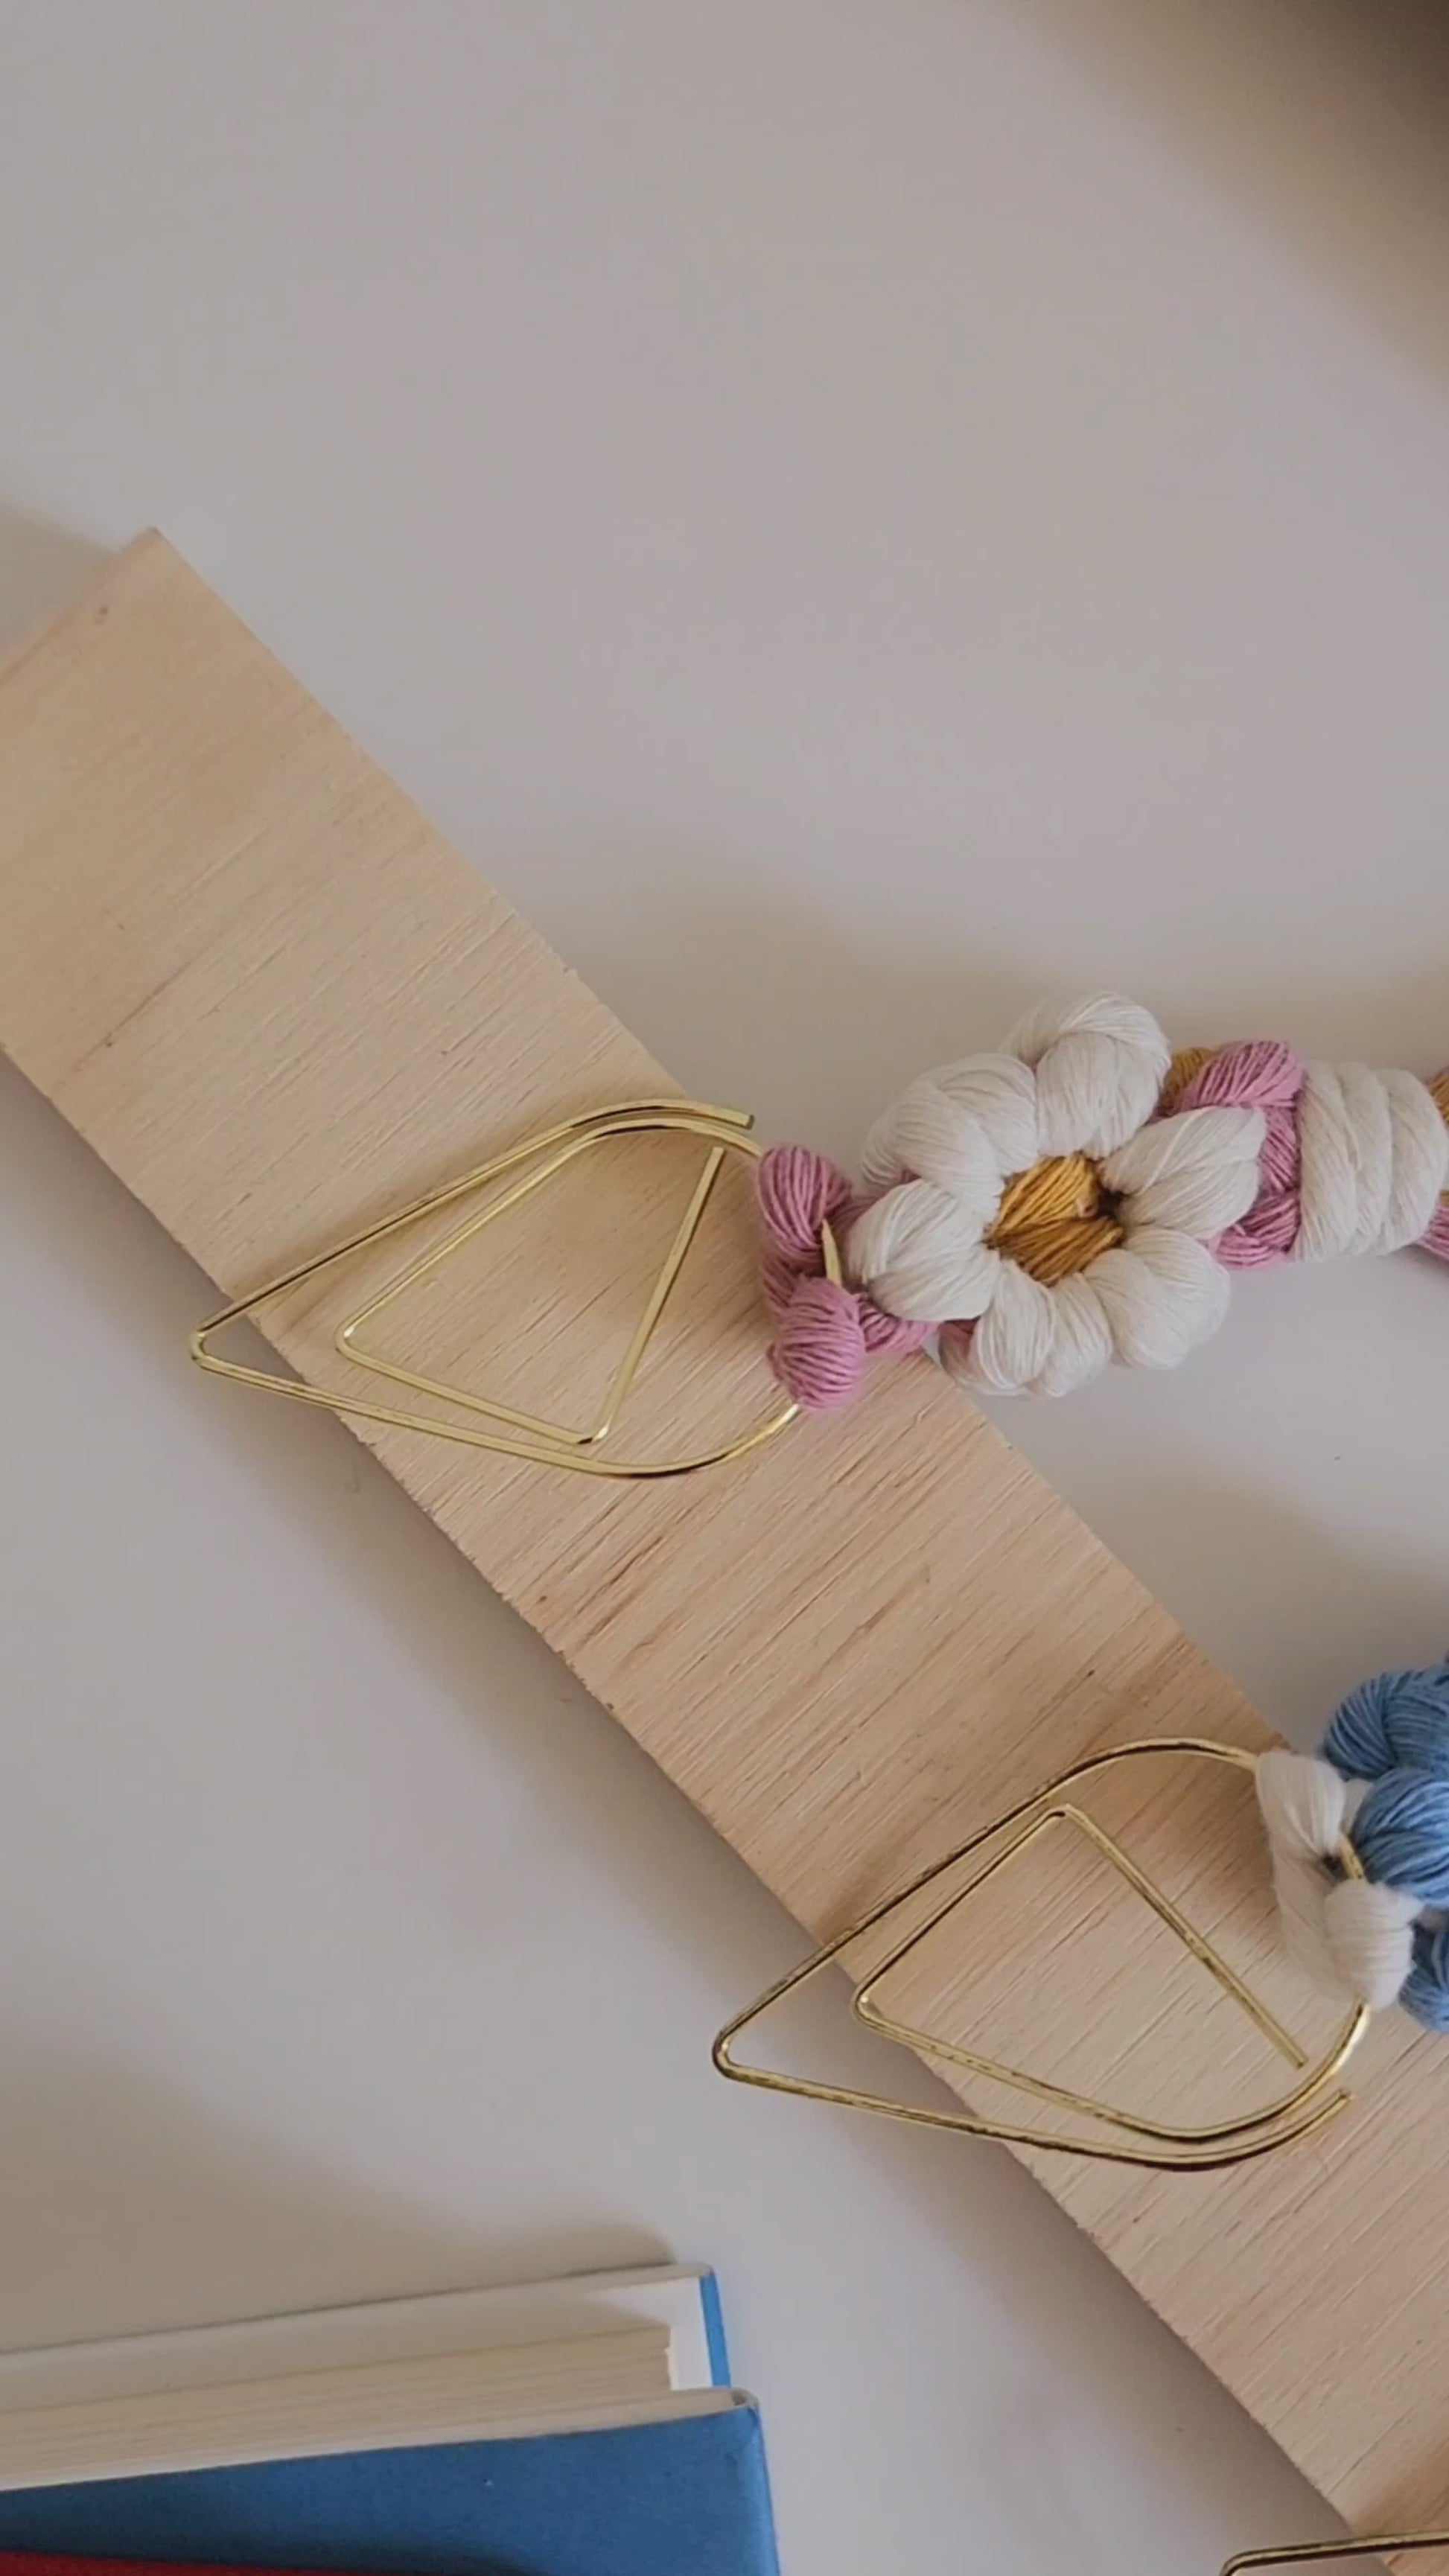 How to make a ribbon bookmark 